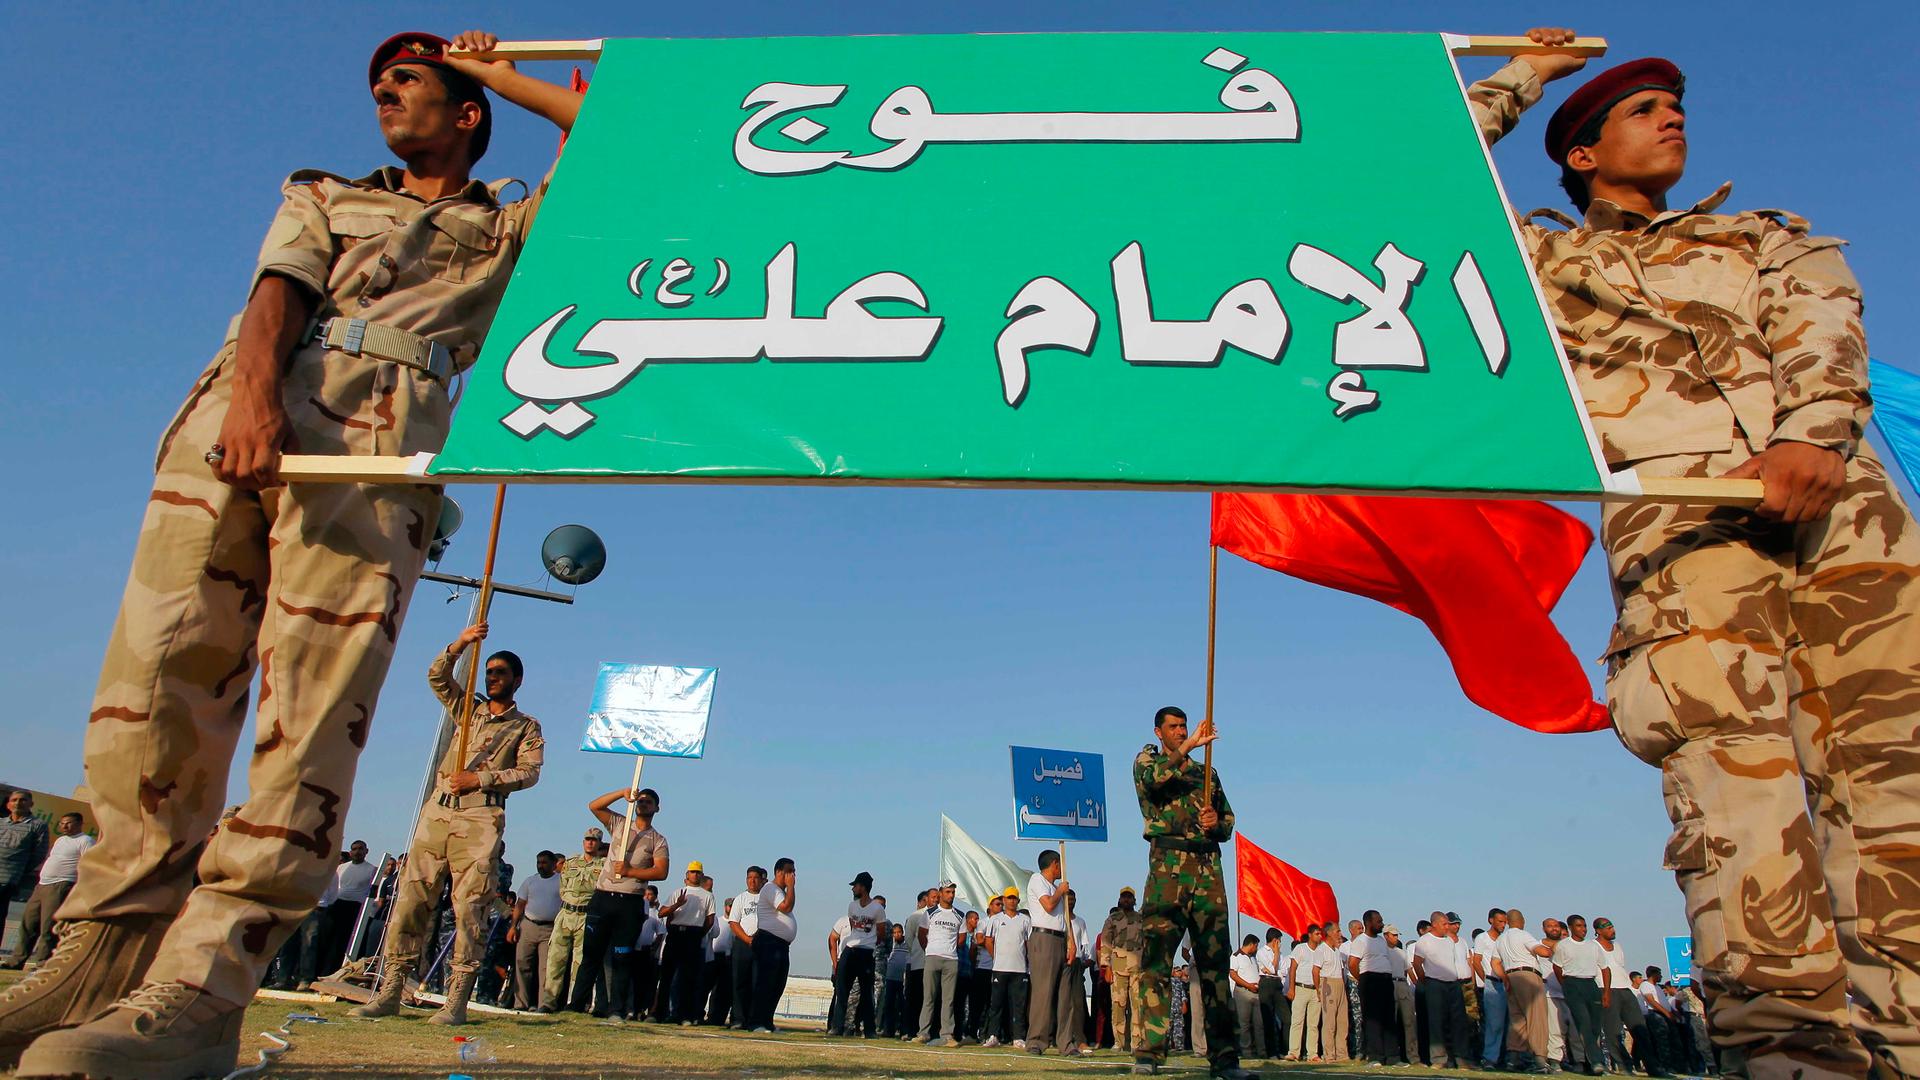 Shi'ite volunteers, who have joined the Iraqi army to fight against the predominantly Sunni militants from the radical Islamic State of Iraq and Syria (ISIS), hold a sign during a graduation ceremony after completing their field training in Najaf, that re